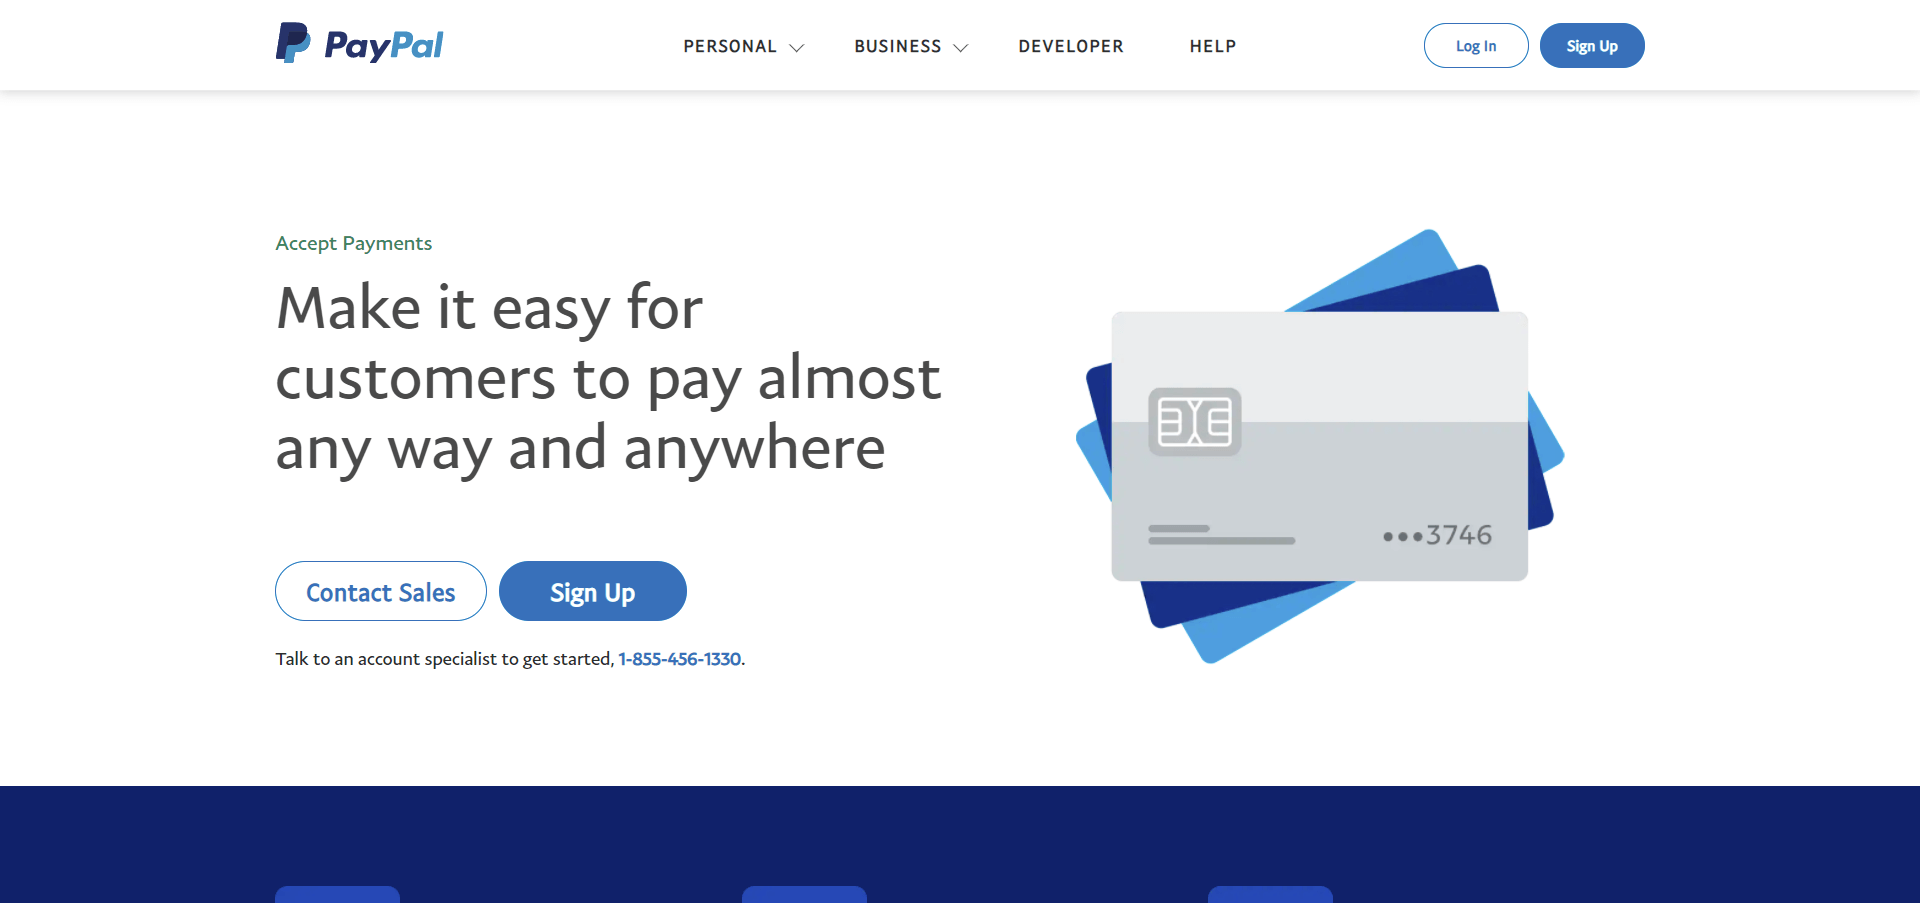 paypal main website banner